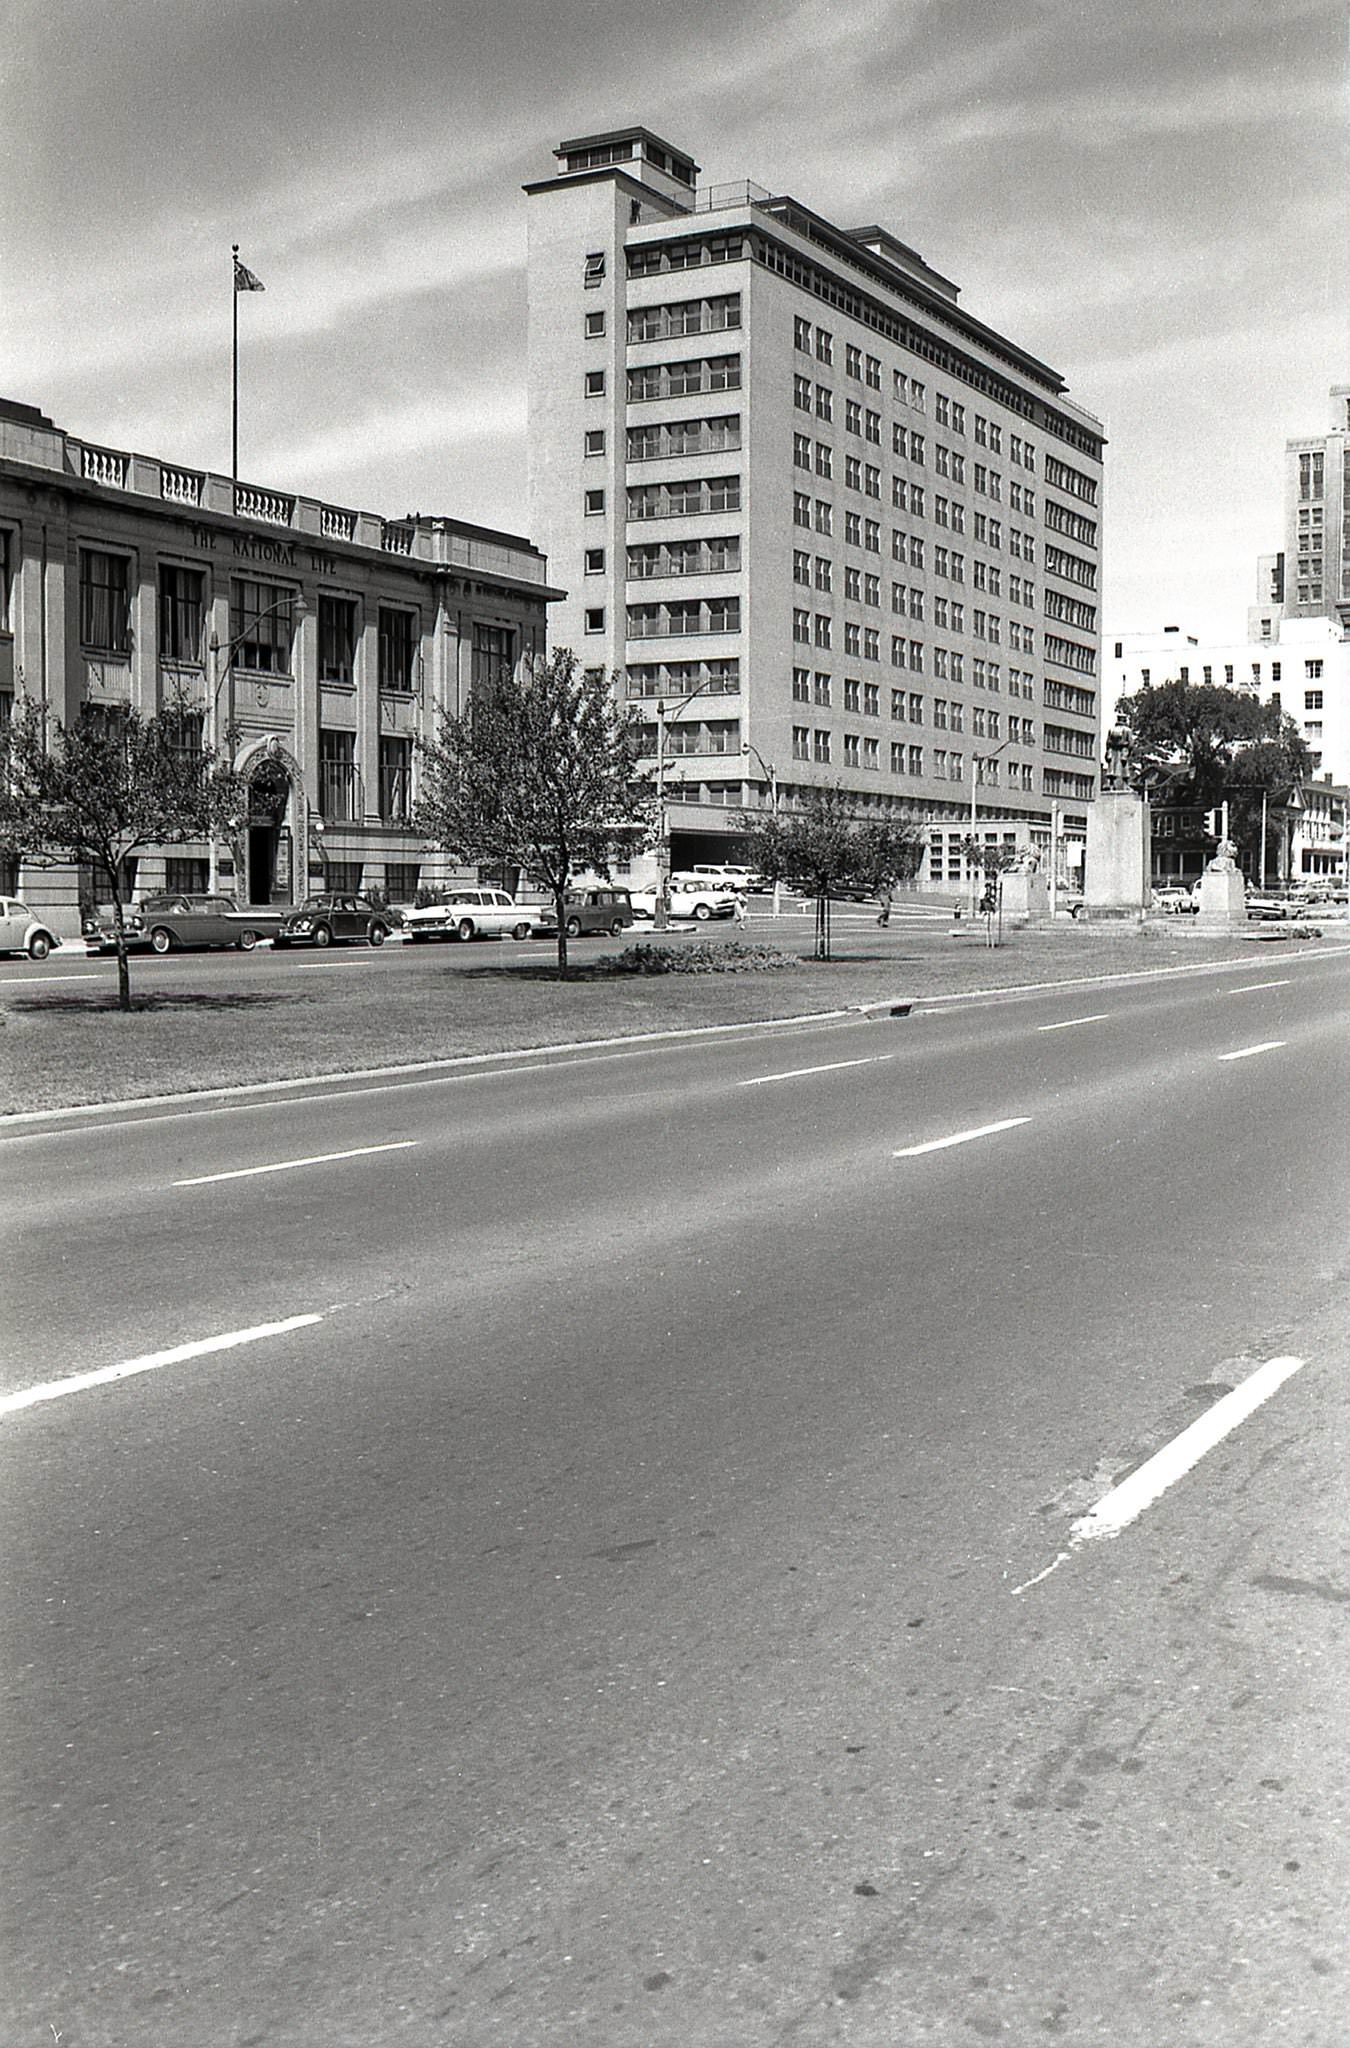 West side of University Ave at Elm, 1960s.